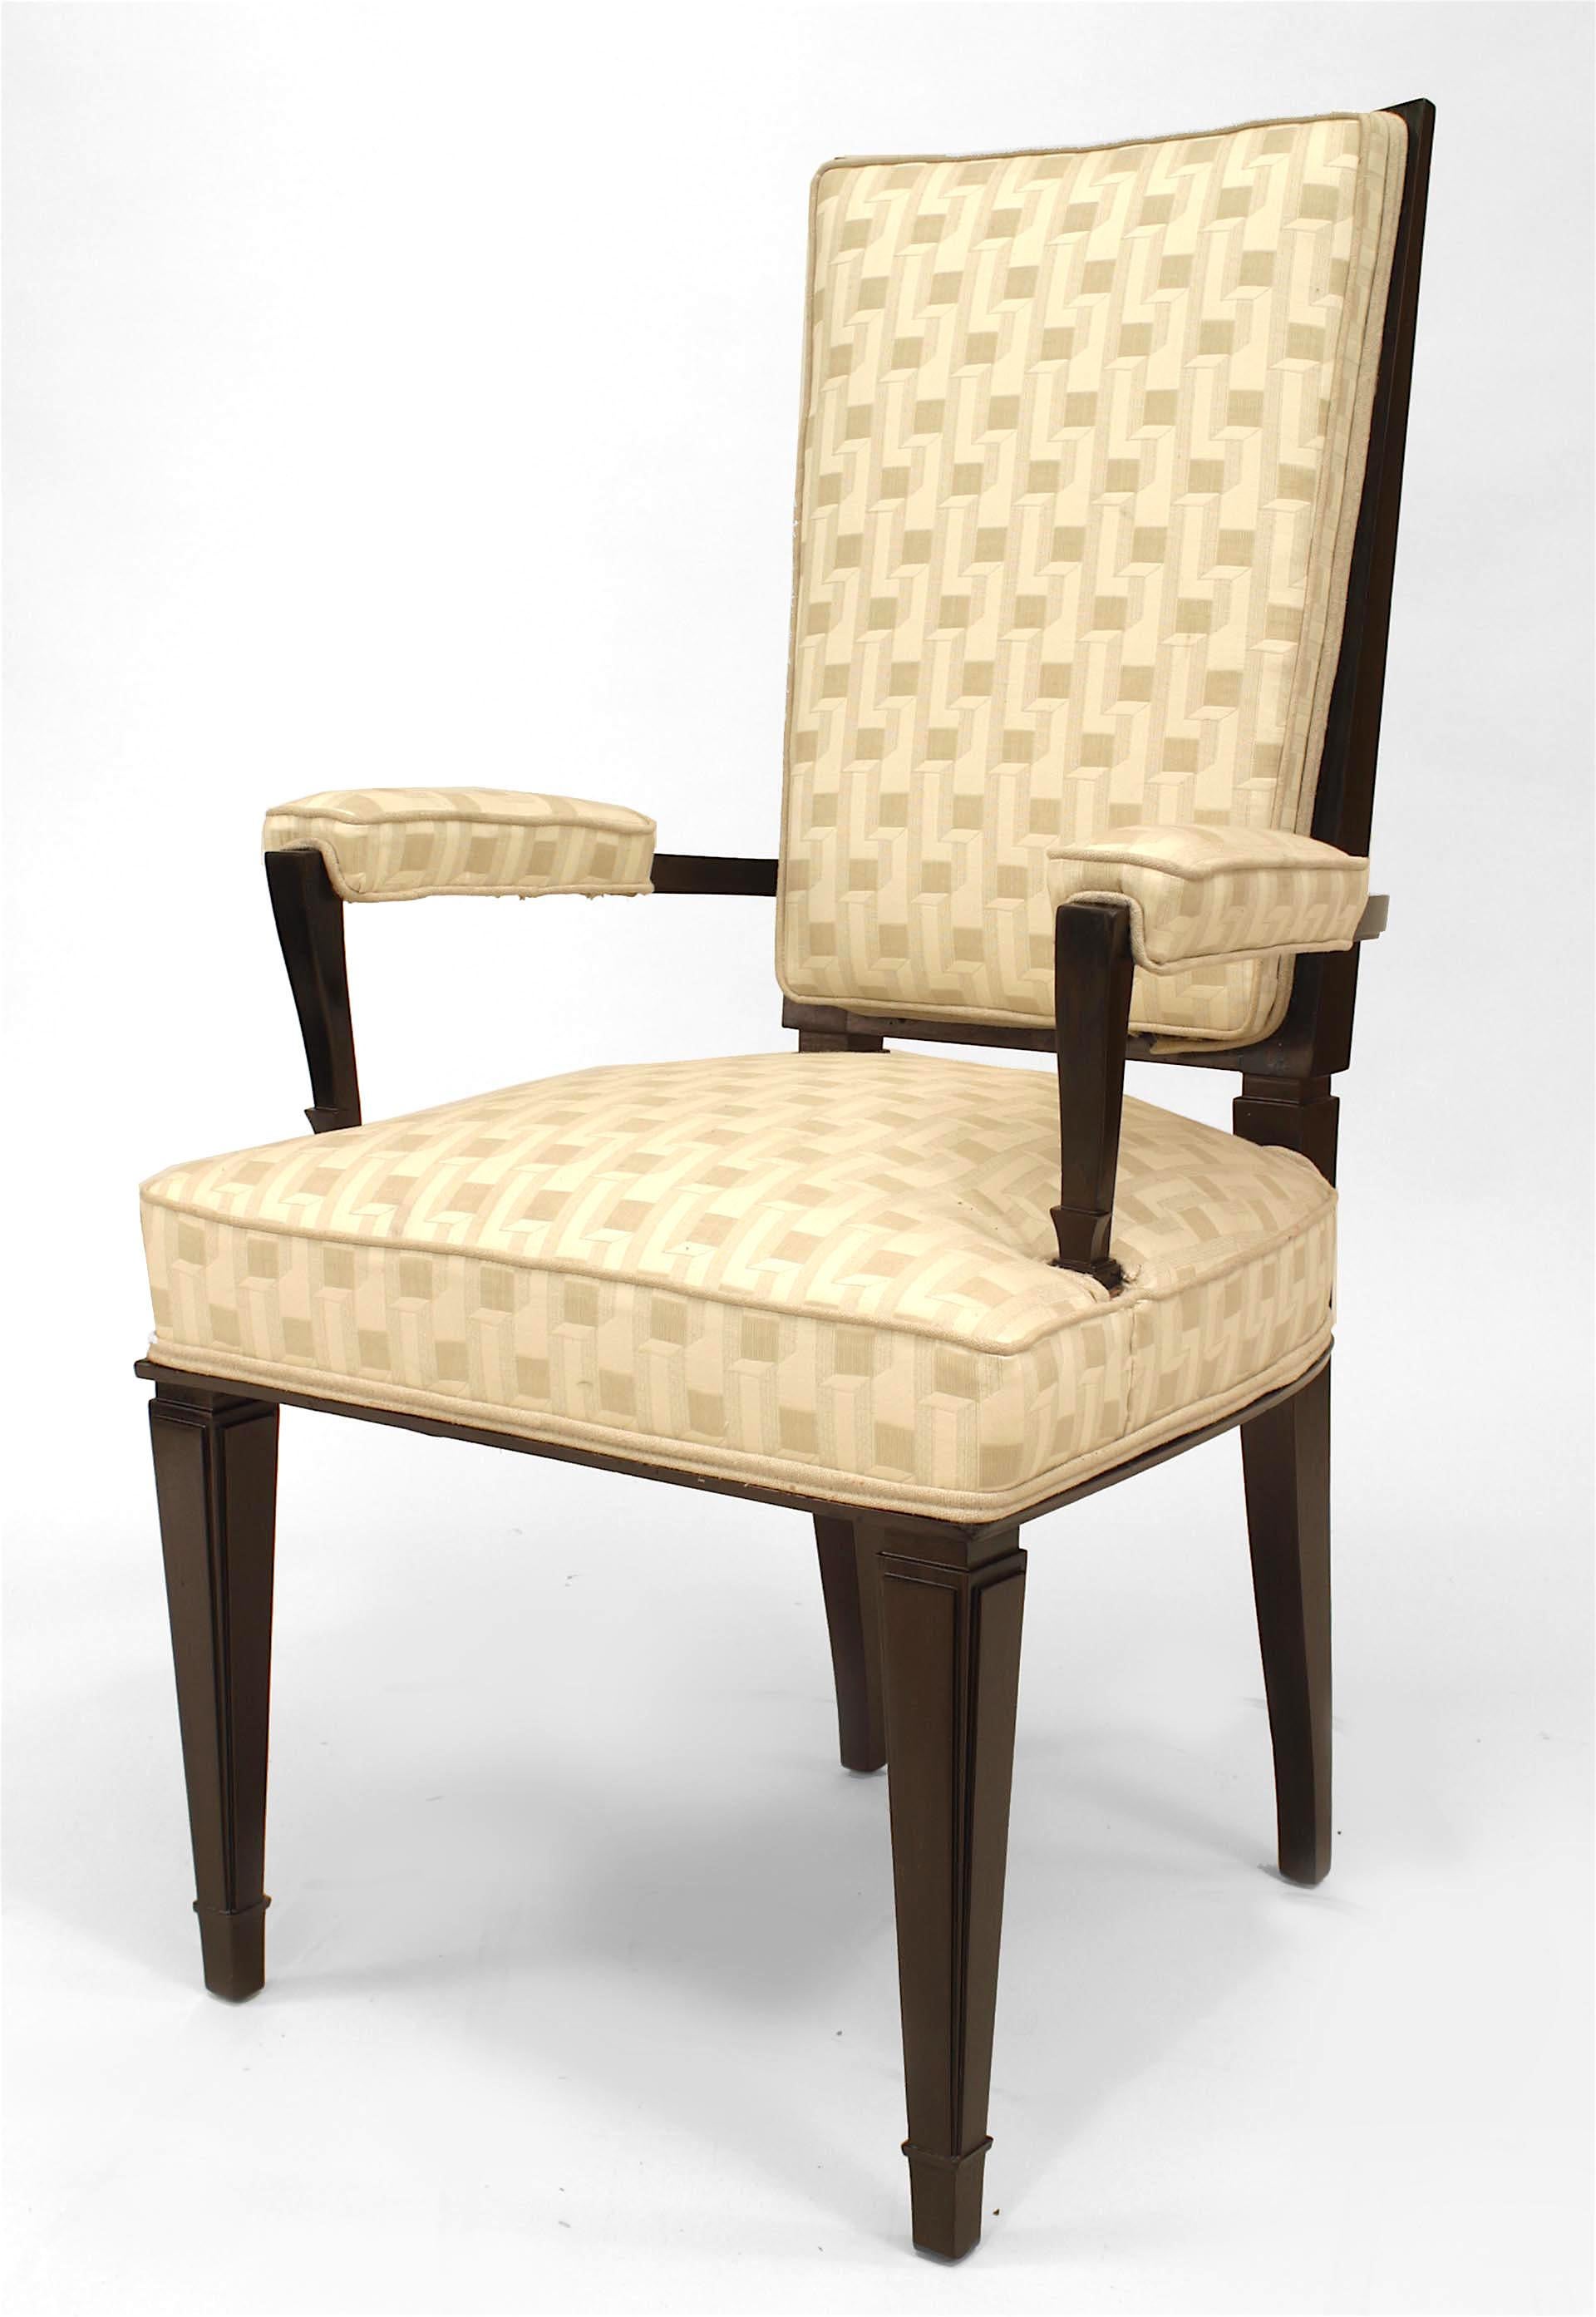 Set of 4 French 1940s ebonized high back open arm chairs with geometric design upholstery (att: DOMINIQUE)
